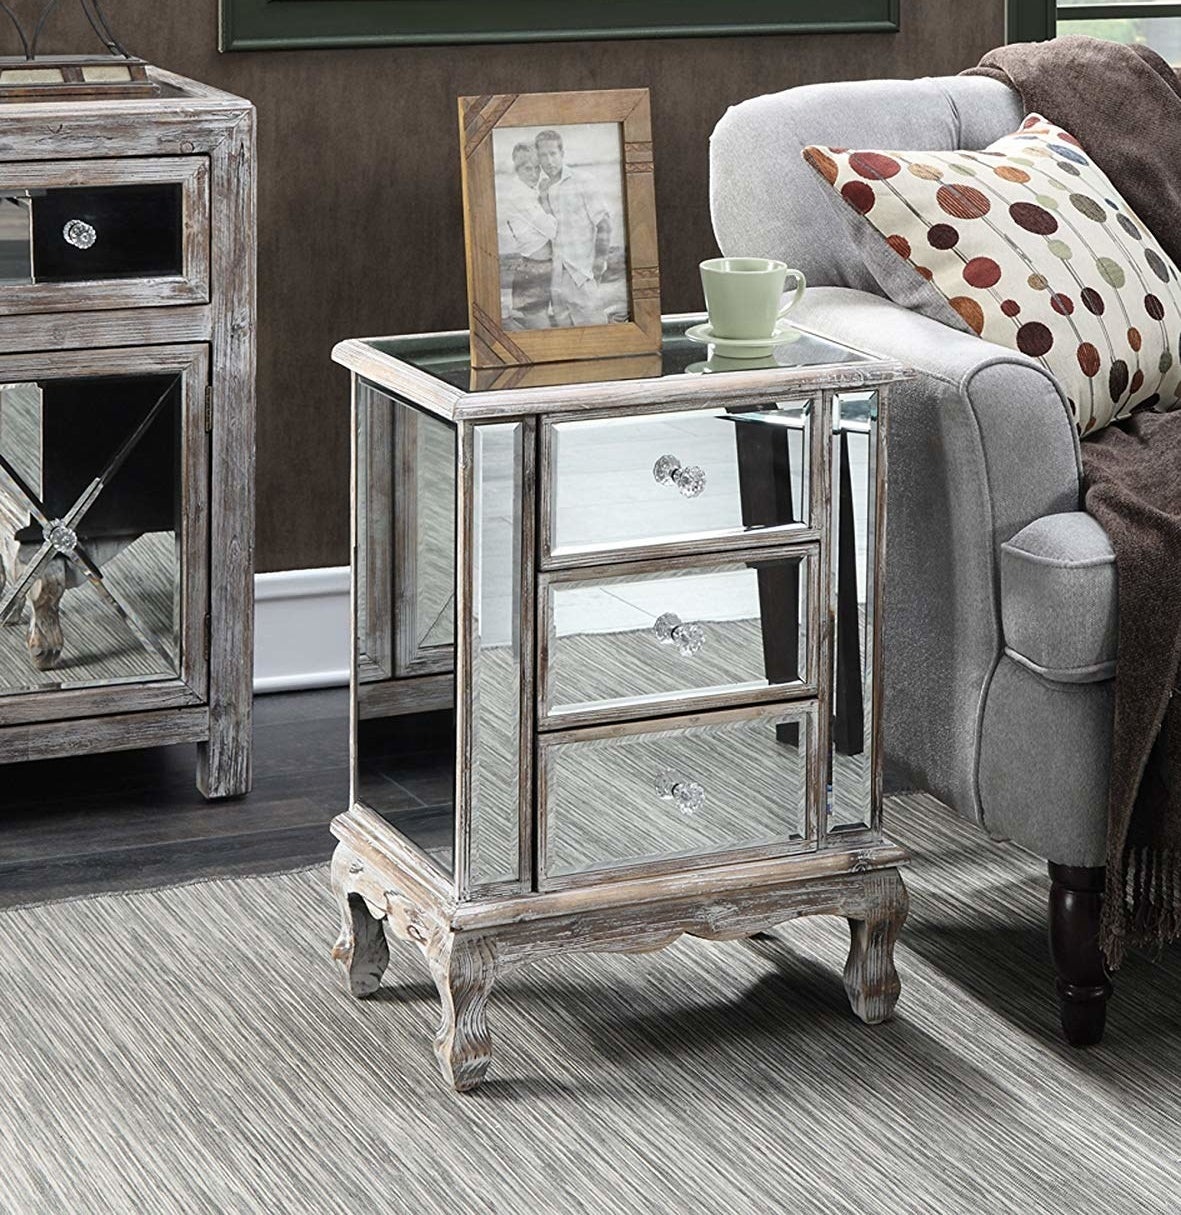 The mirrored end table with three shelves, crystal knobs, and wooden legs